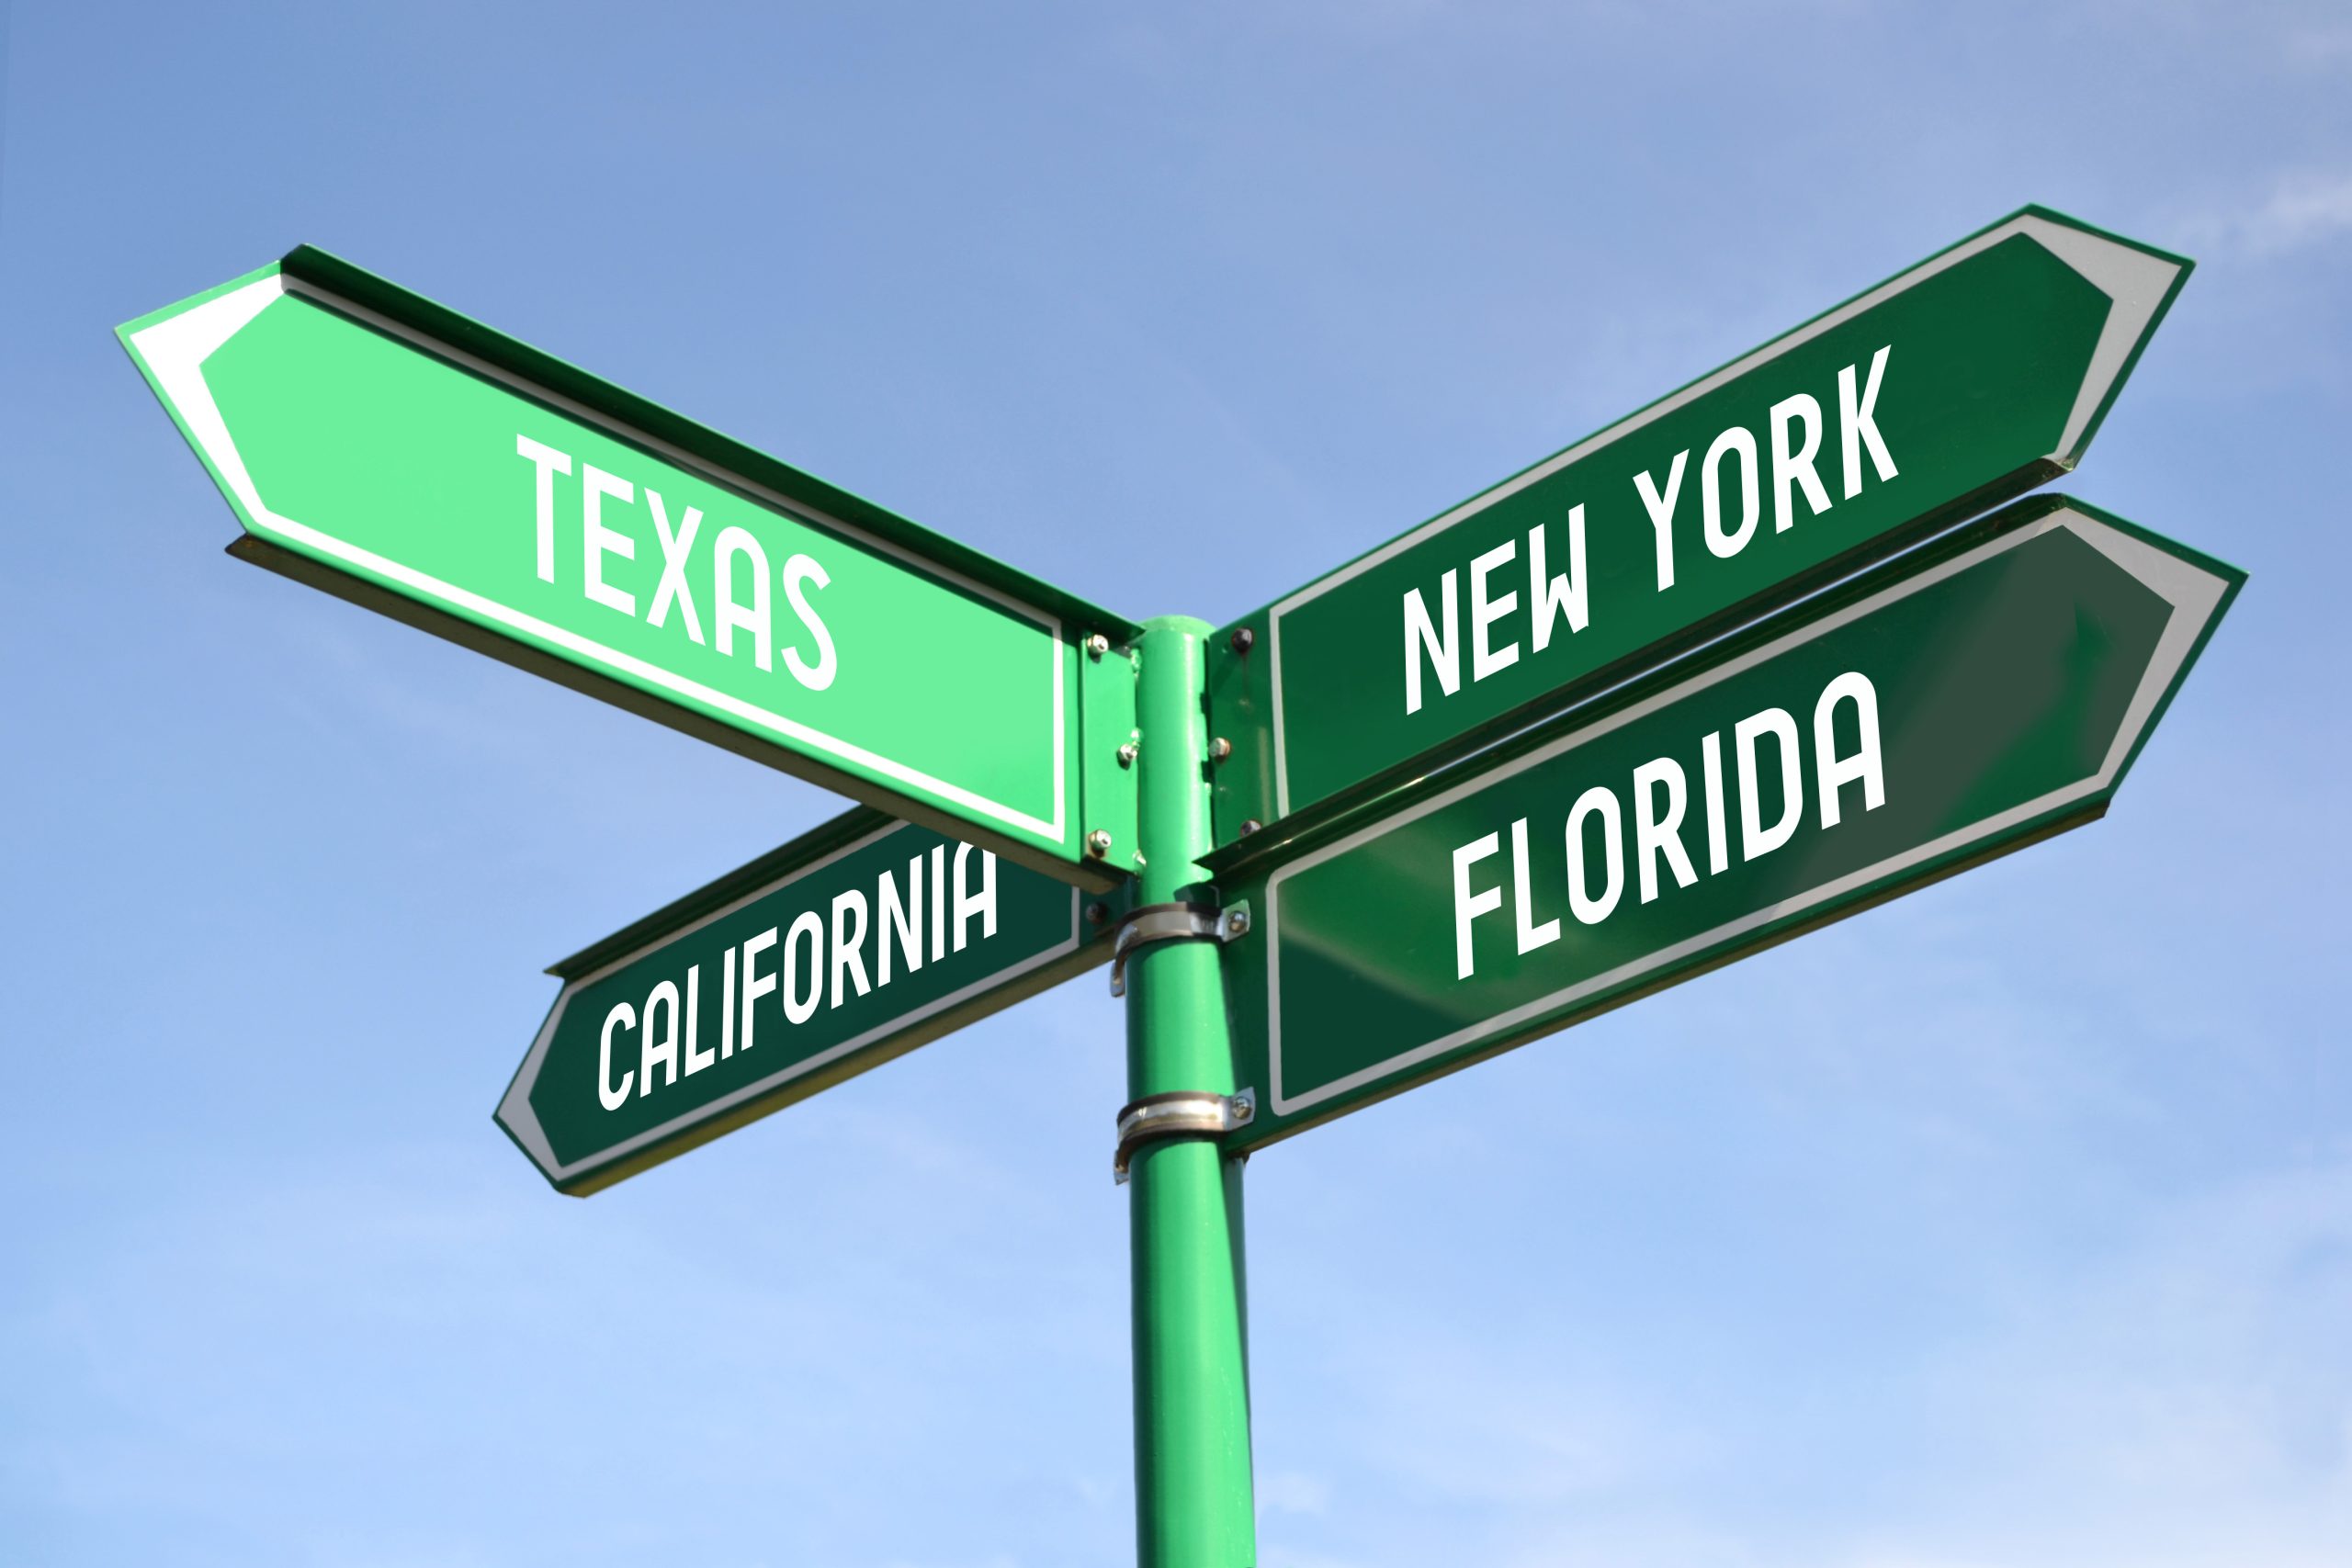 image of directional signs pointing to different cities to illustrate real estate license reciprocity